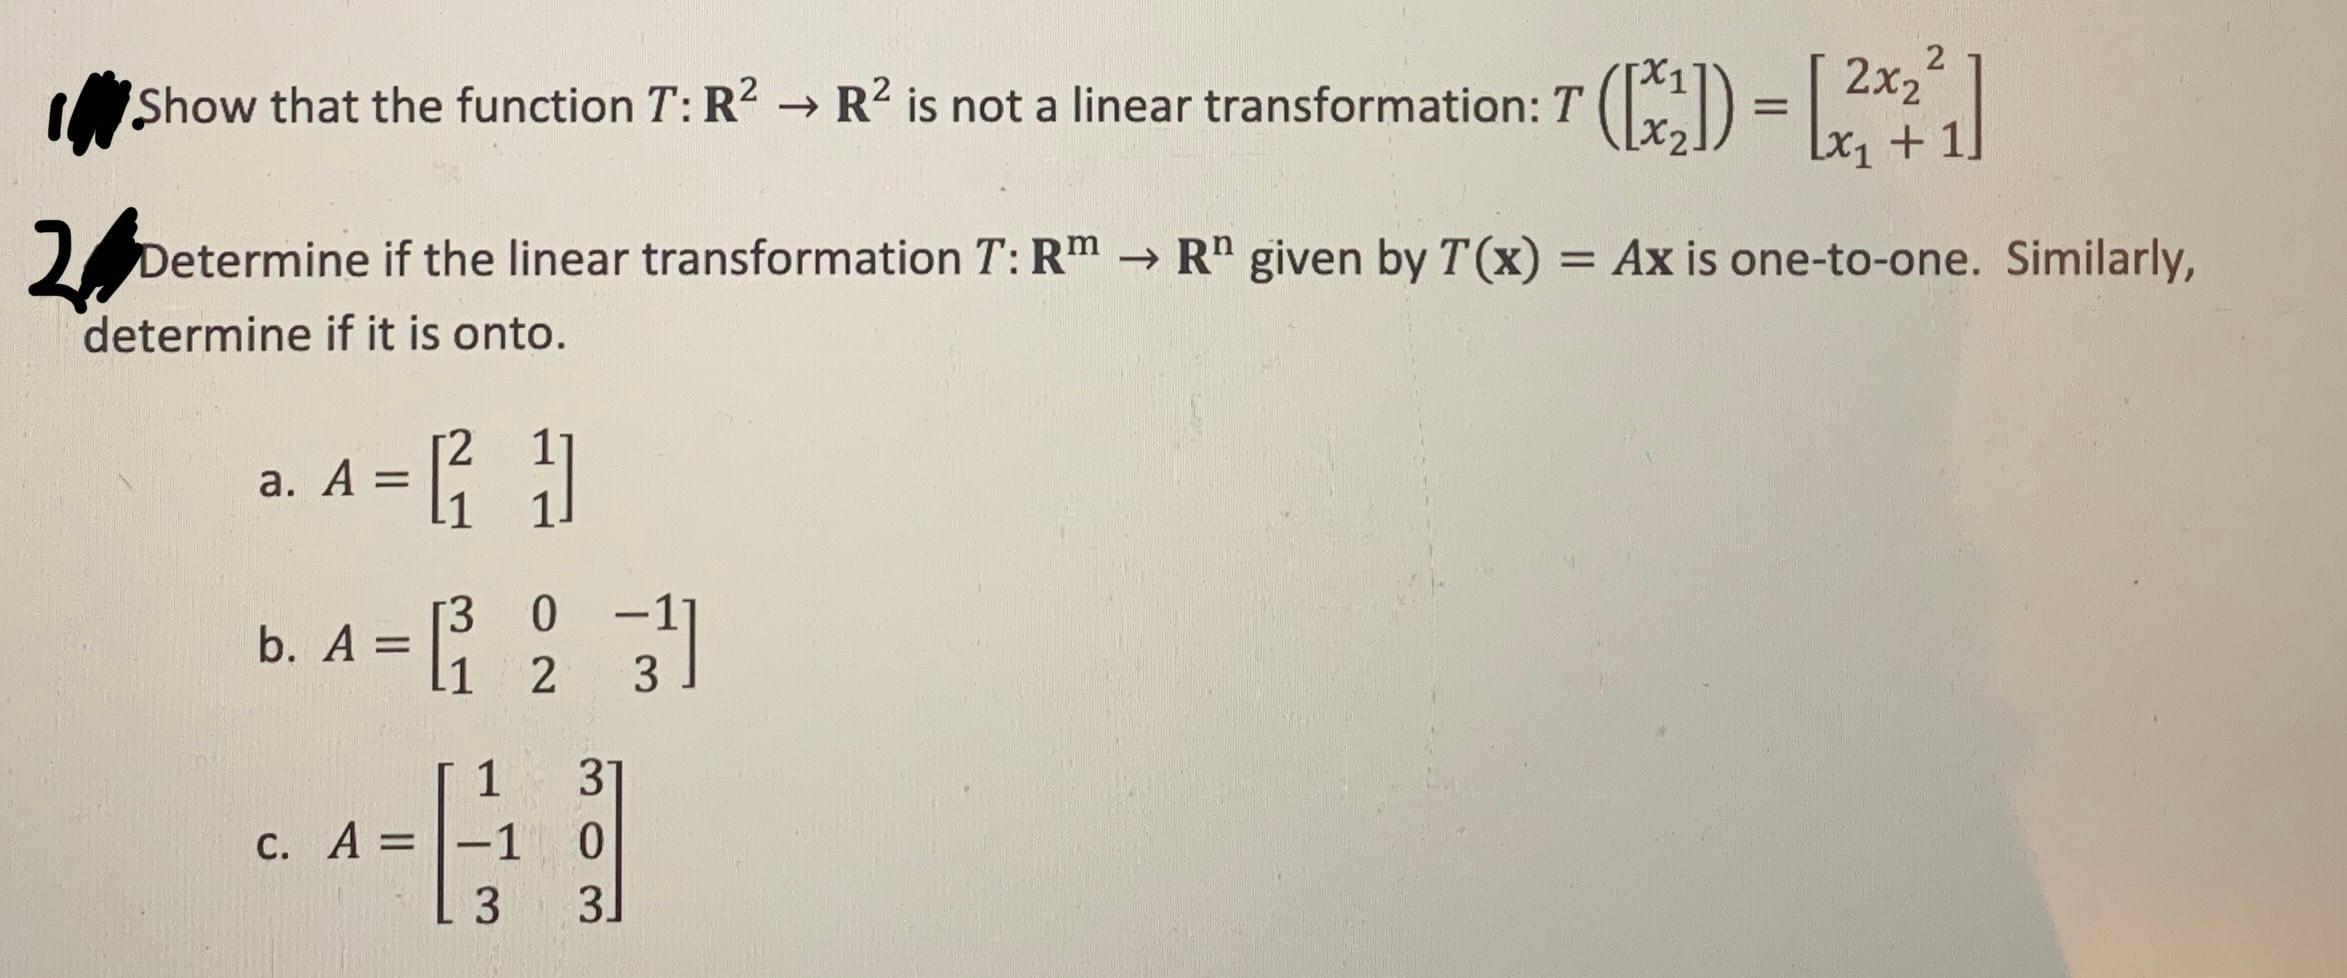 W. Show that the function ( T: mathbf{R}^{2} ightarrow mathbf{R}^{2} ) is not a linear transformation: ( Tleft(left[